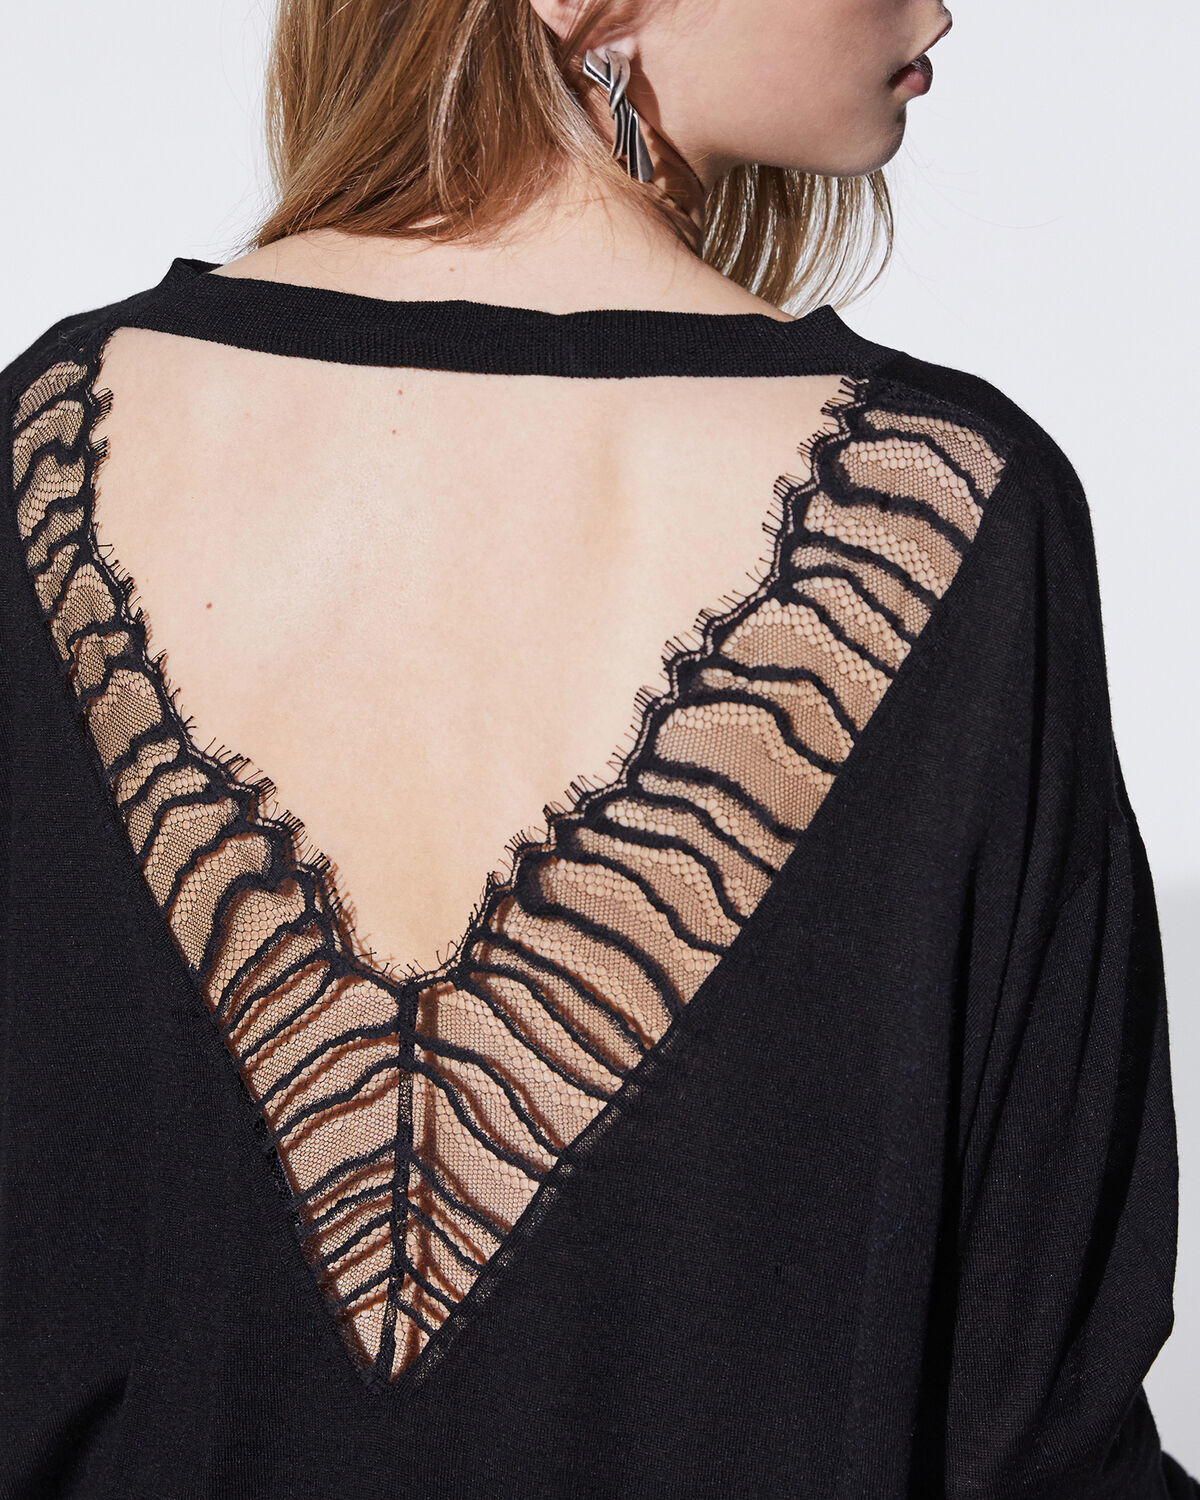 Photo of IRO Paris Ladson Sweater Black - This Mid-season Sweater With Bat Sleeves Is Adorned With A Fine Lace Braid On The Back For A Resolutely Feminine Look. Wear It With A Leather Skirt For A Chic Rock Look. Fall Winter 19